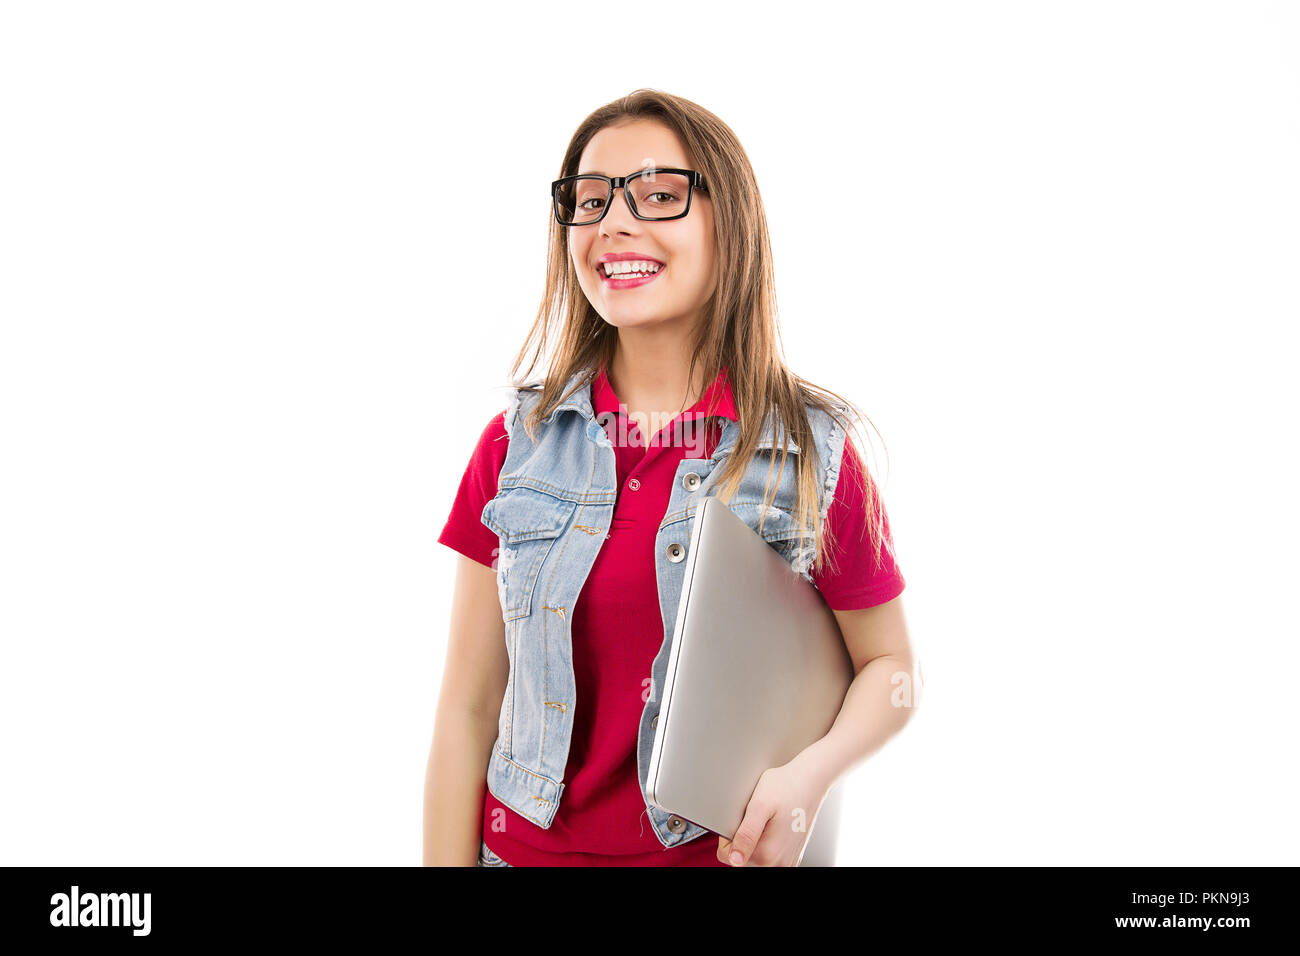 Pretty young woman in eyeglasses holding laptop and smiling at camera isolated on white background Stock Photo